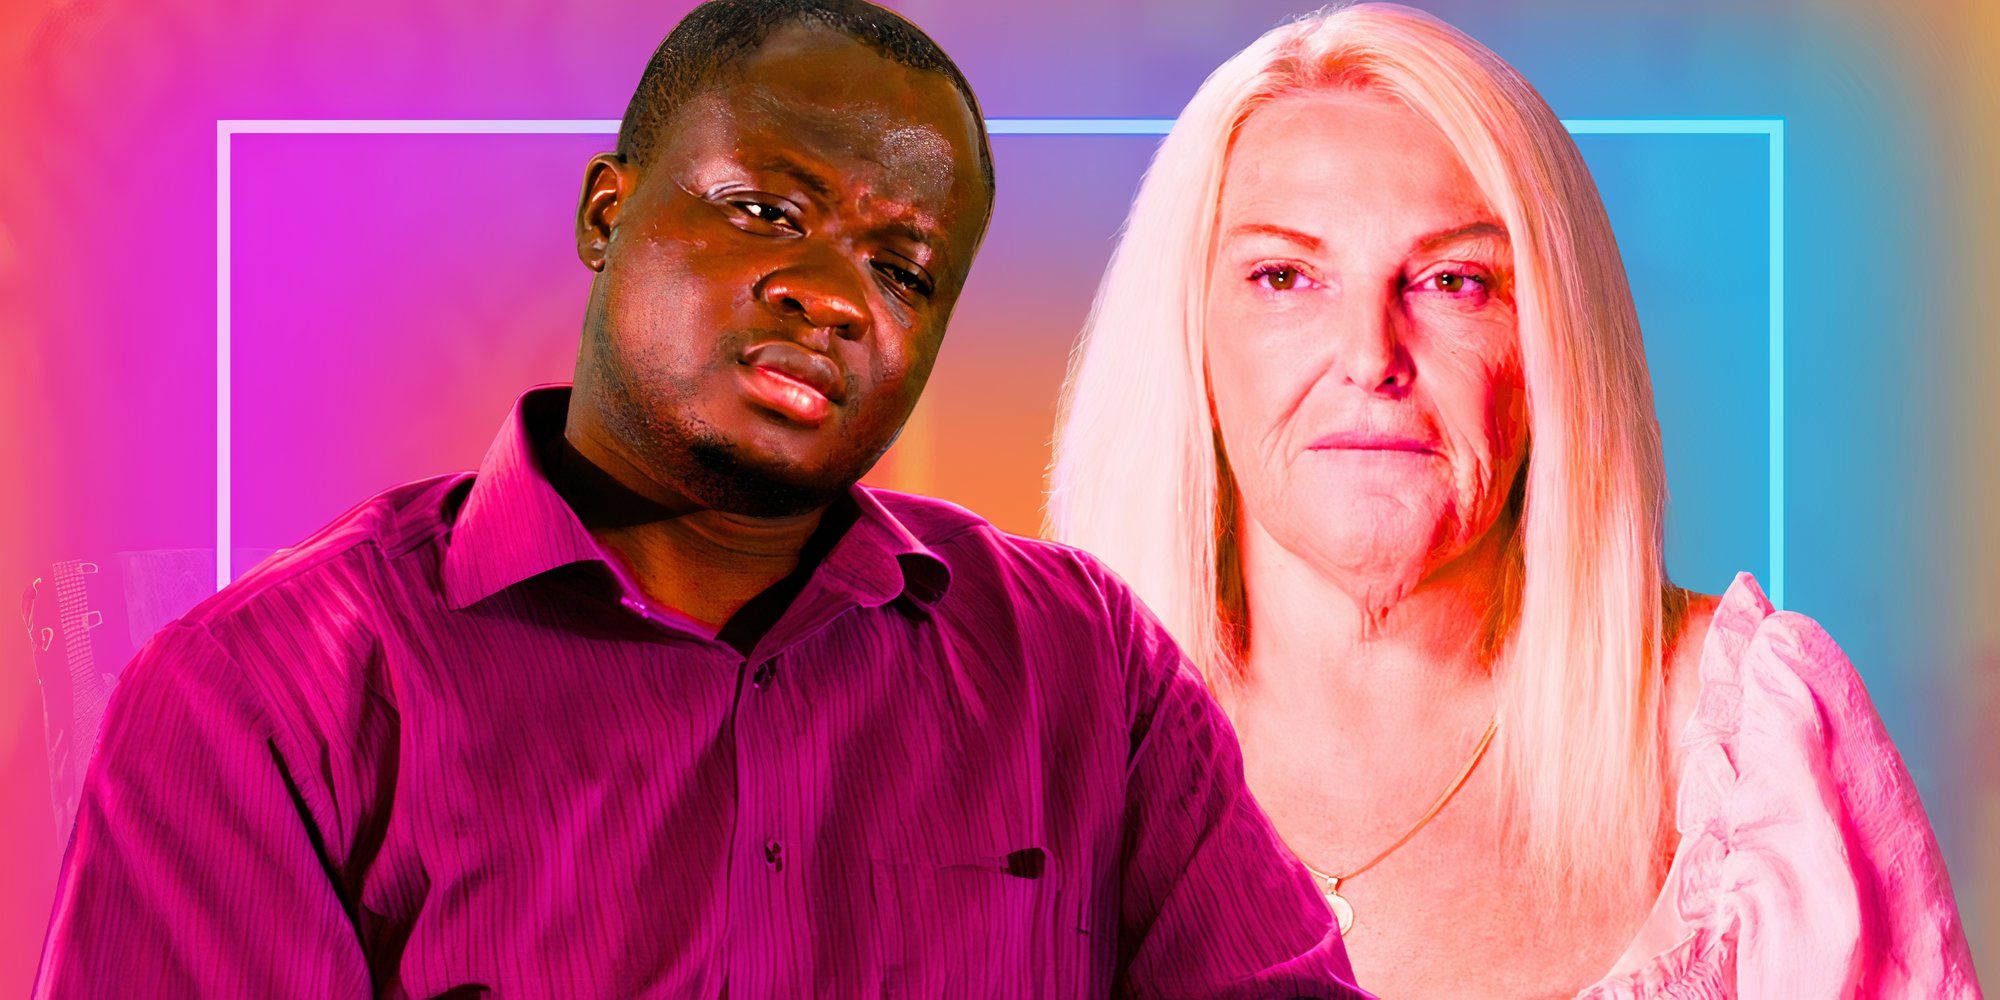 Montage Of Michael Ilesanmi Angela Deem looking sad 90 Day Fiancé franchise with neon purple and blue background